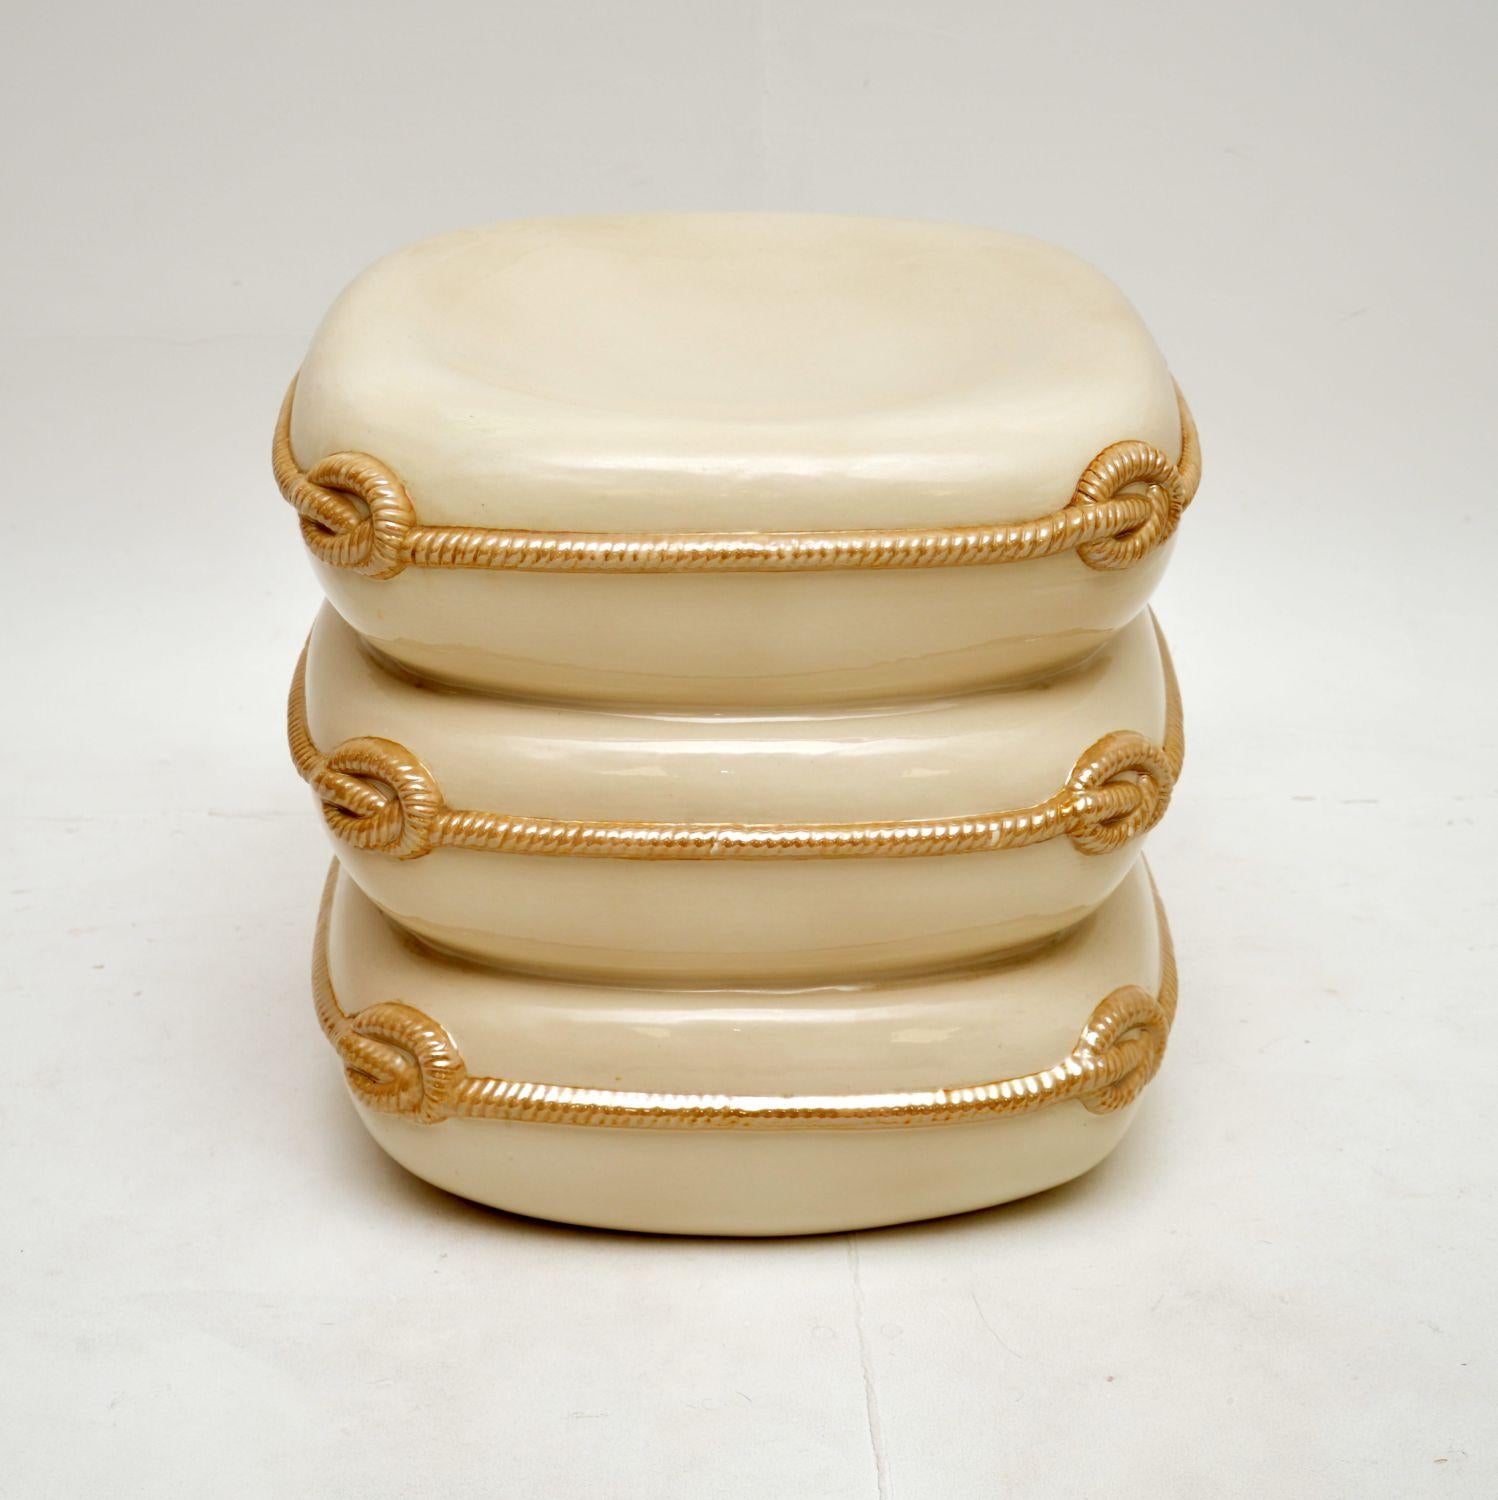 A stunning 1970’s vintage Italian ceramic stool in the form of three stacked cushions.

It is of lovely quality, it is a very striking and also functional piece of art. The top has a very slight dip, making it quite comfortable to perch on.

The